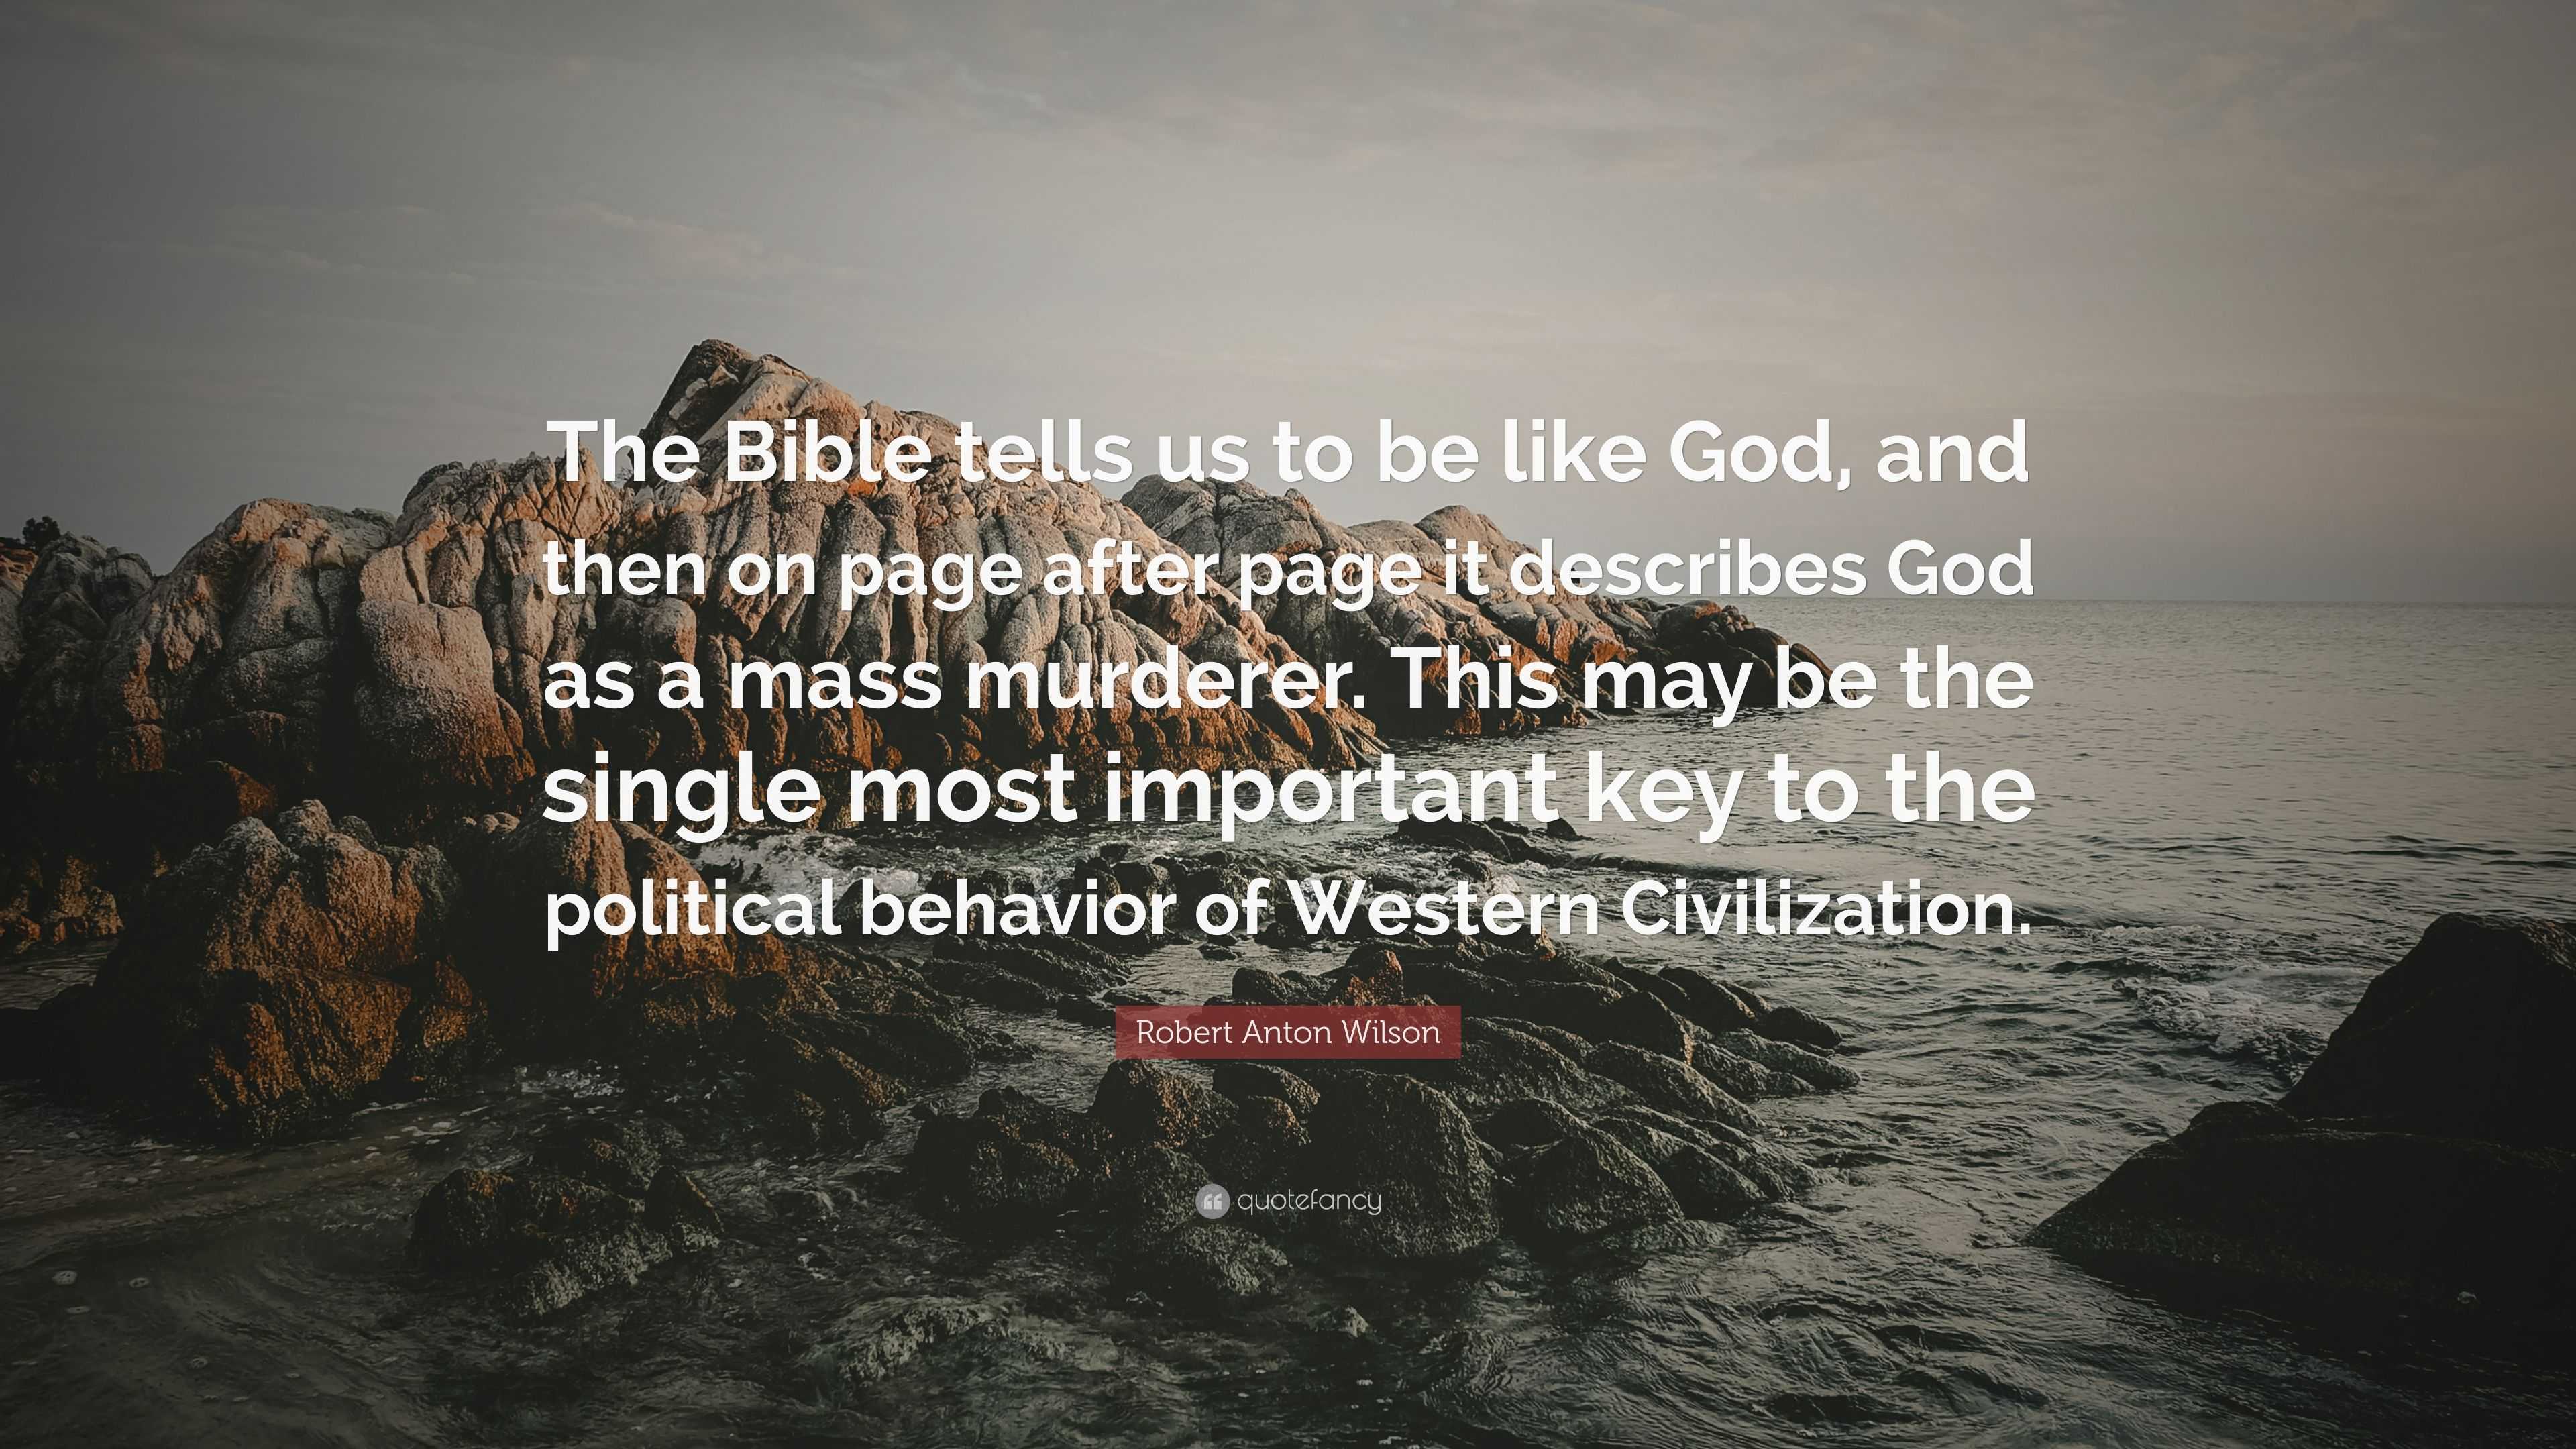 Robert Anton Wilson Quote: “The Bible tells us to be like God, and then ...